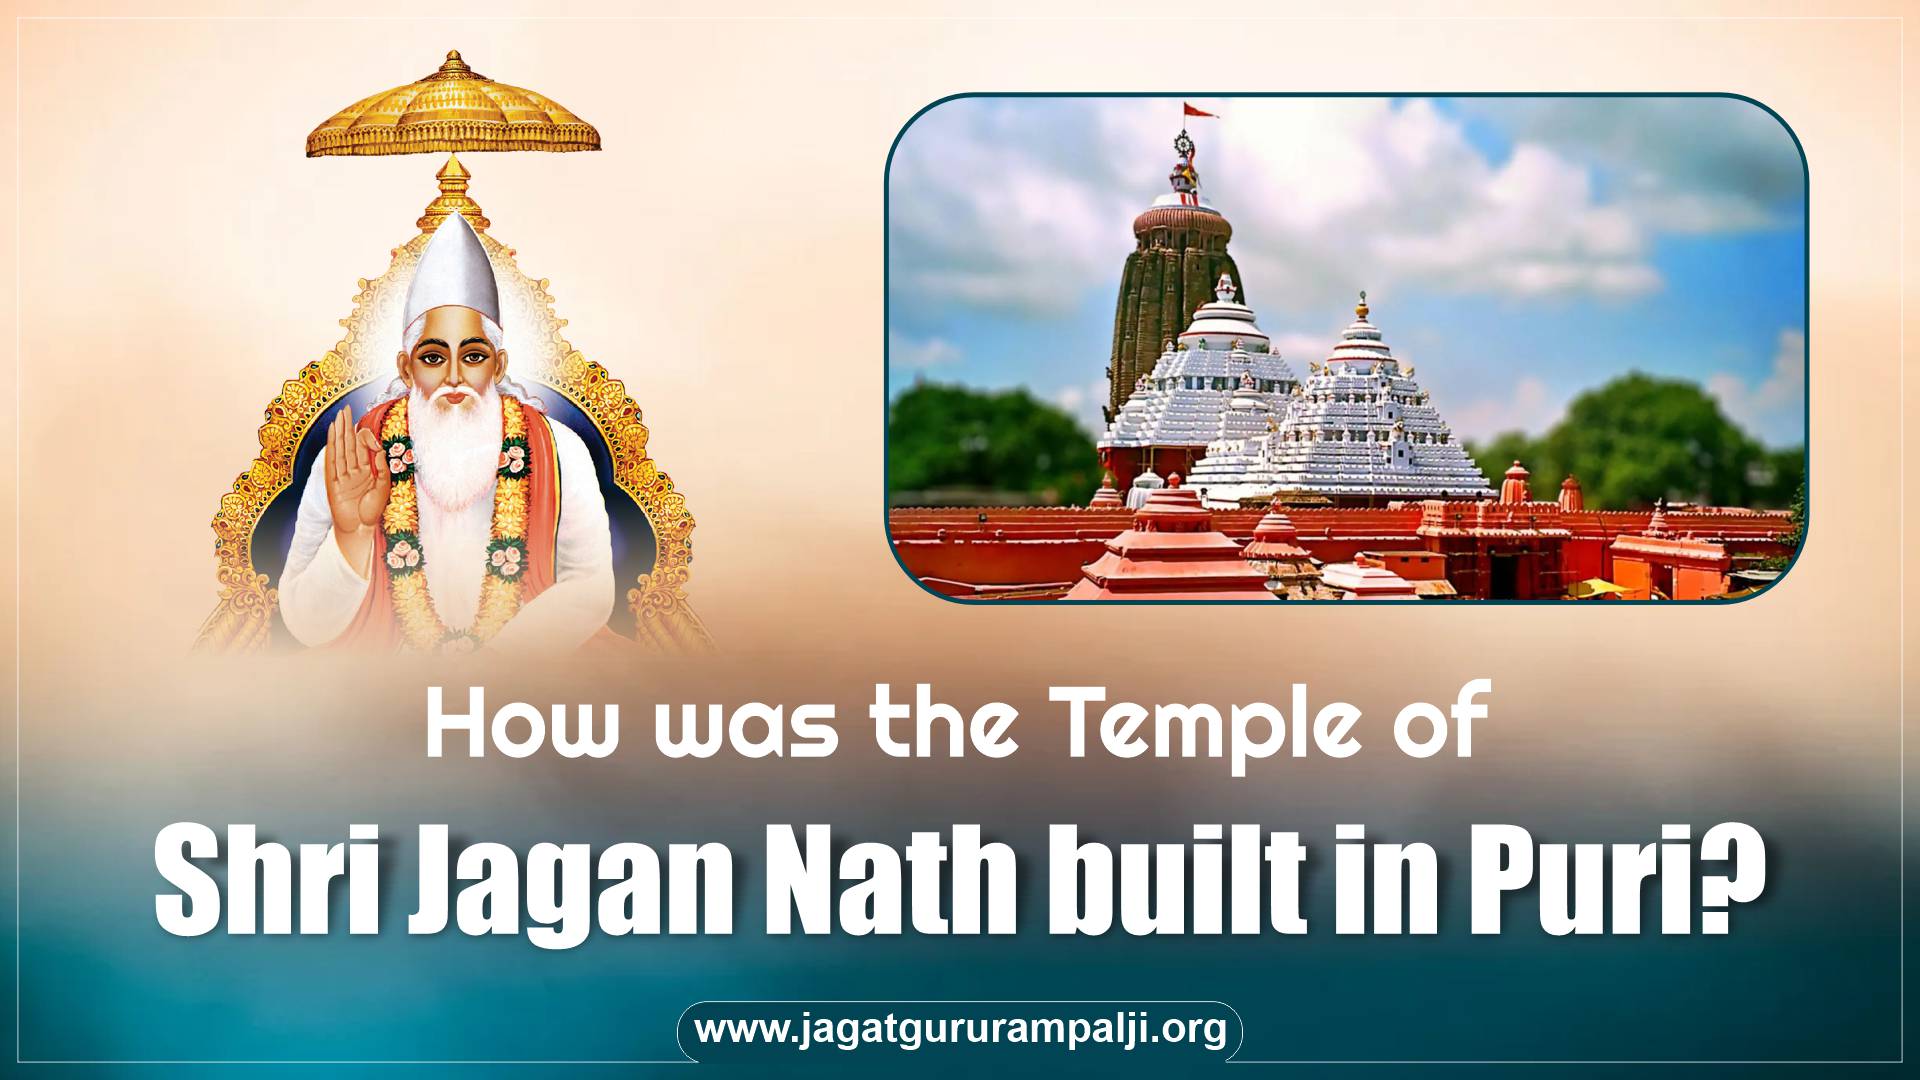 How was the Temple of Shri Jagan Nath built in Puri?